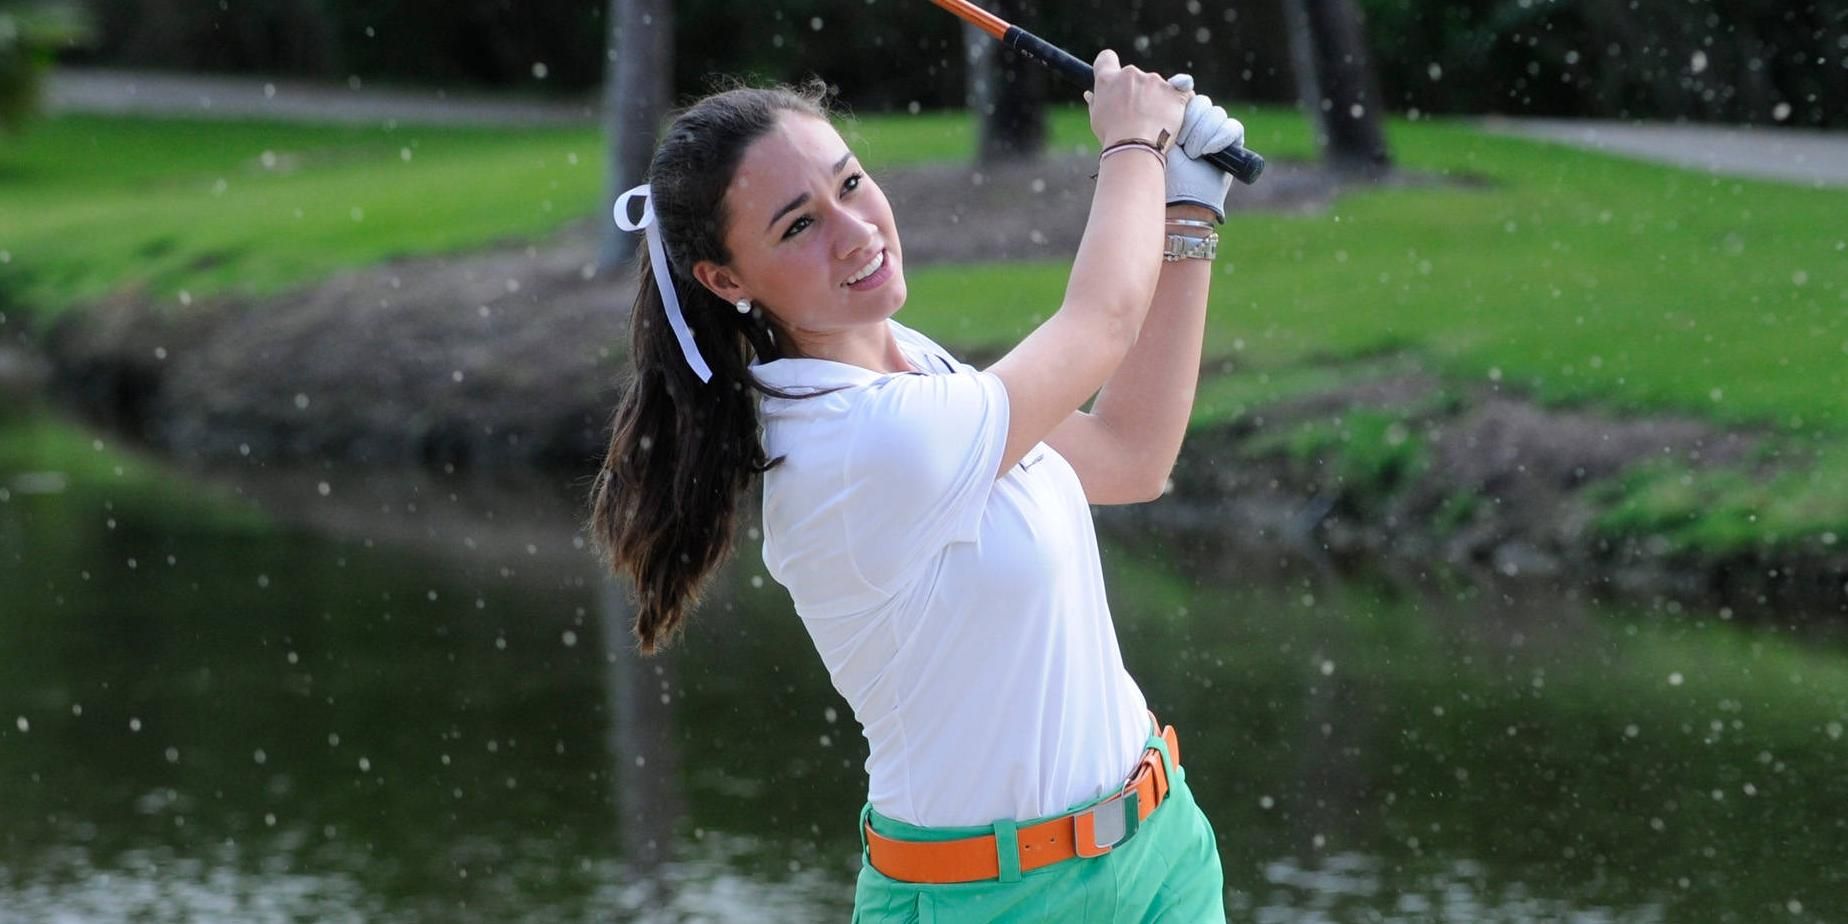 Women's Golf in Fourth at Sir Pizza Challenge